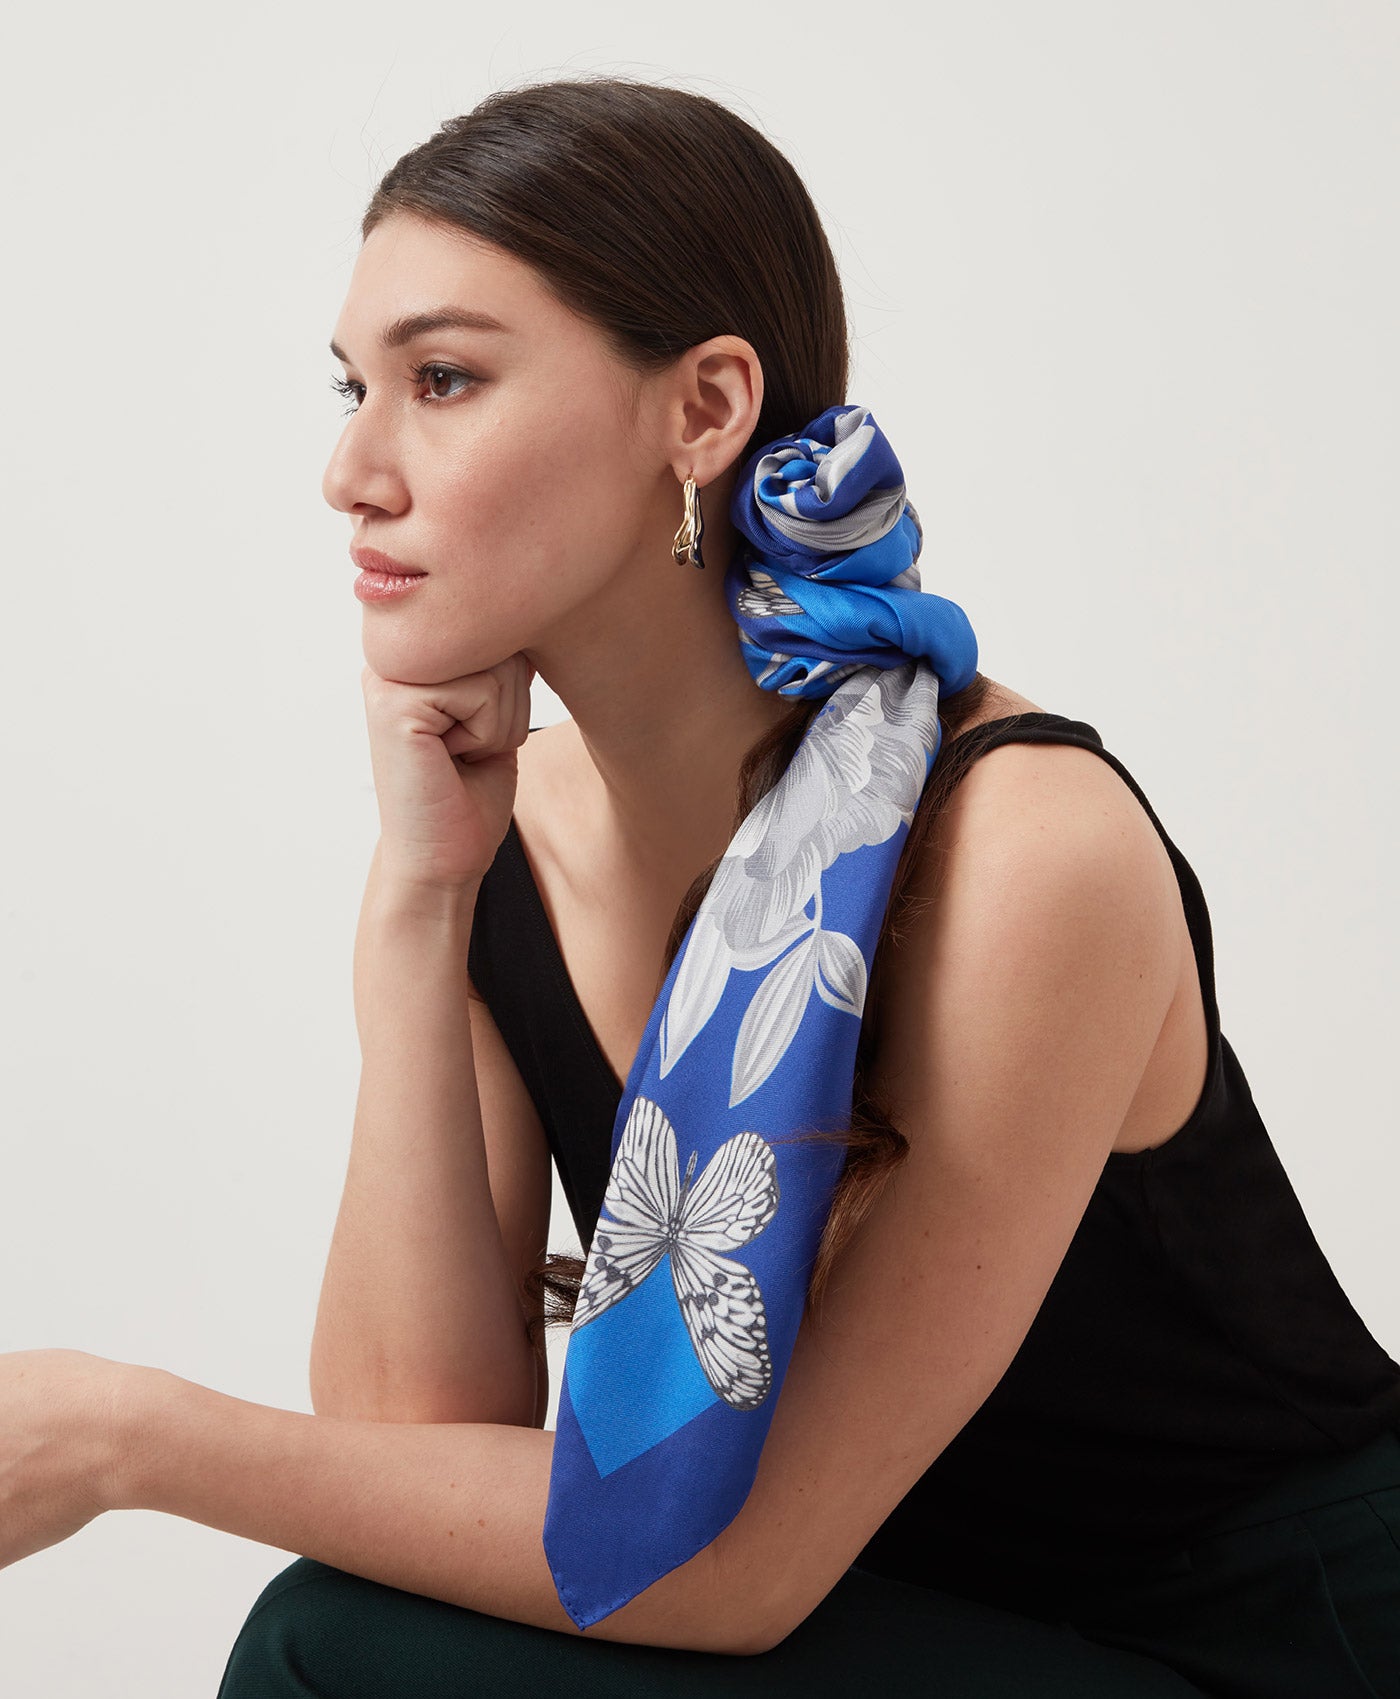 Cobalt Blue British Rose Garden Silk Scarf - Marrying London's design with Italian craftsmanship, a luxurious gift from the heart.